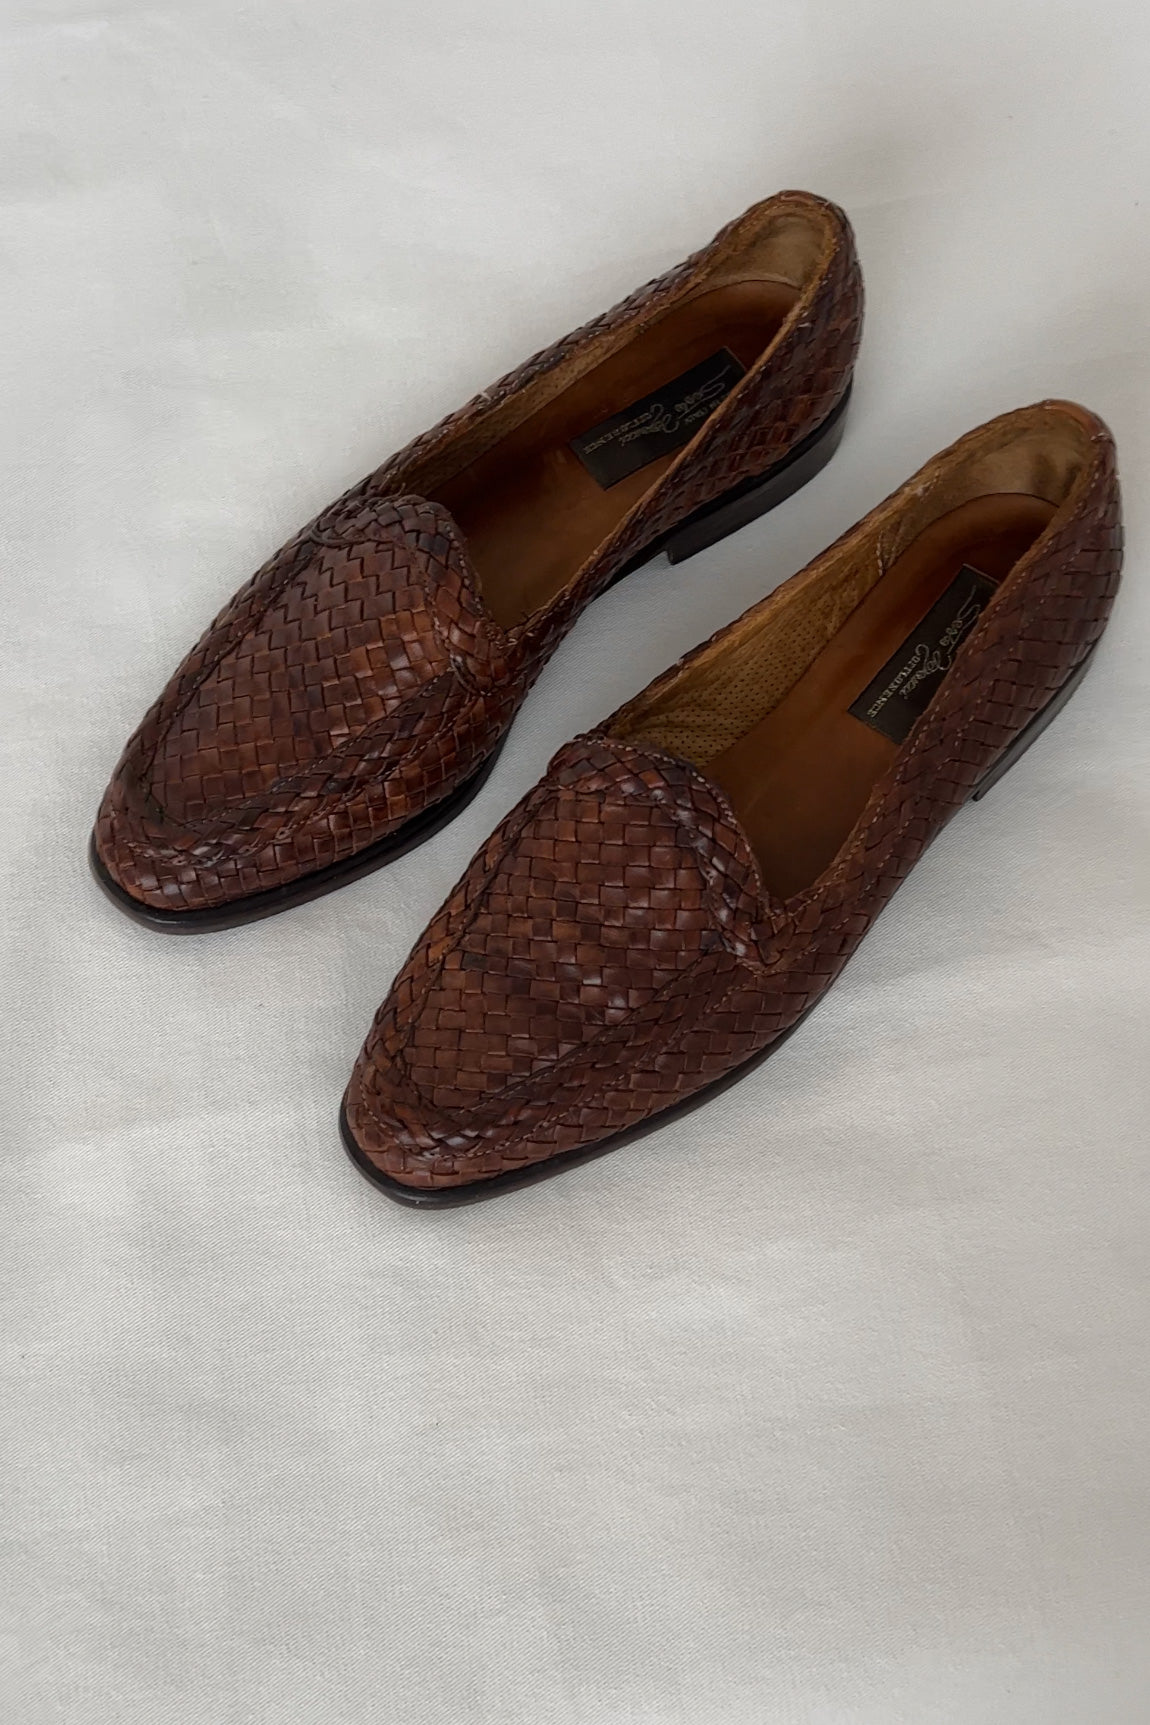 Vintage Italian Pécan Woven Leather Loafers, 8N